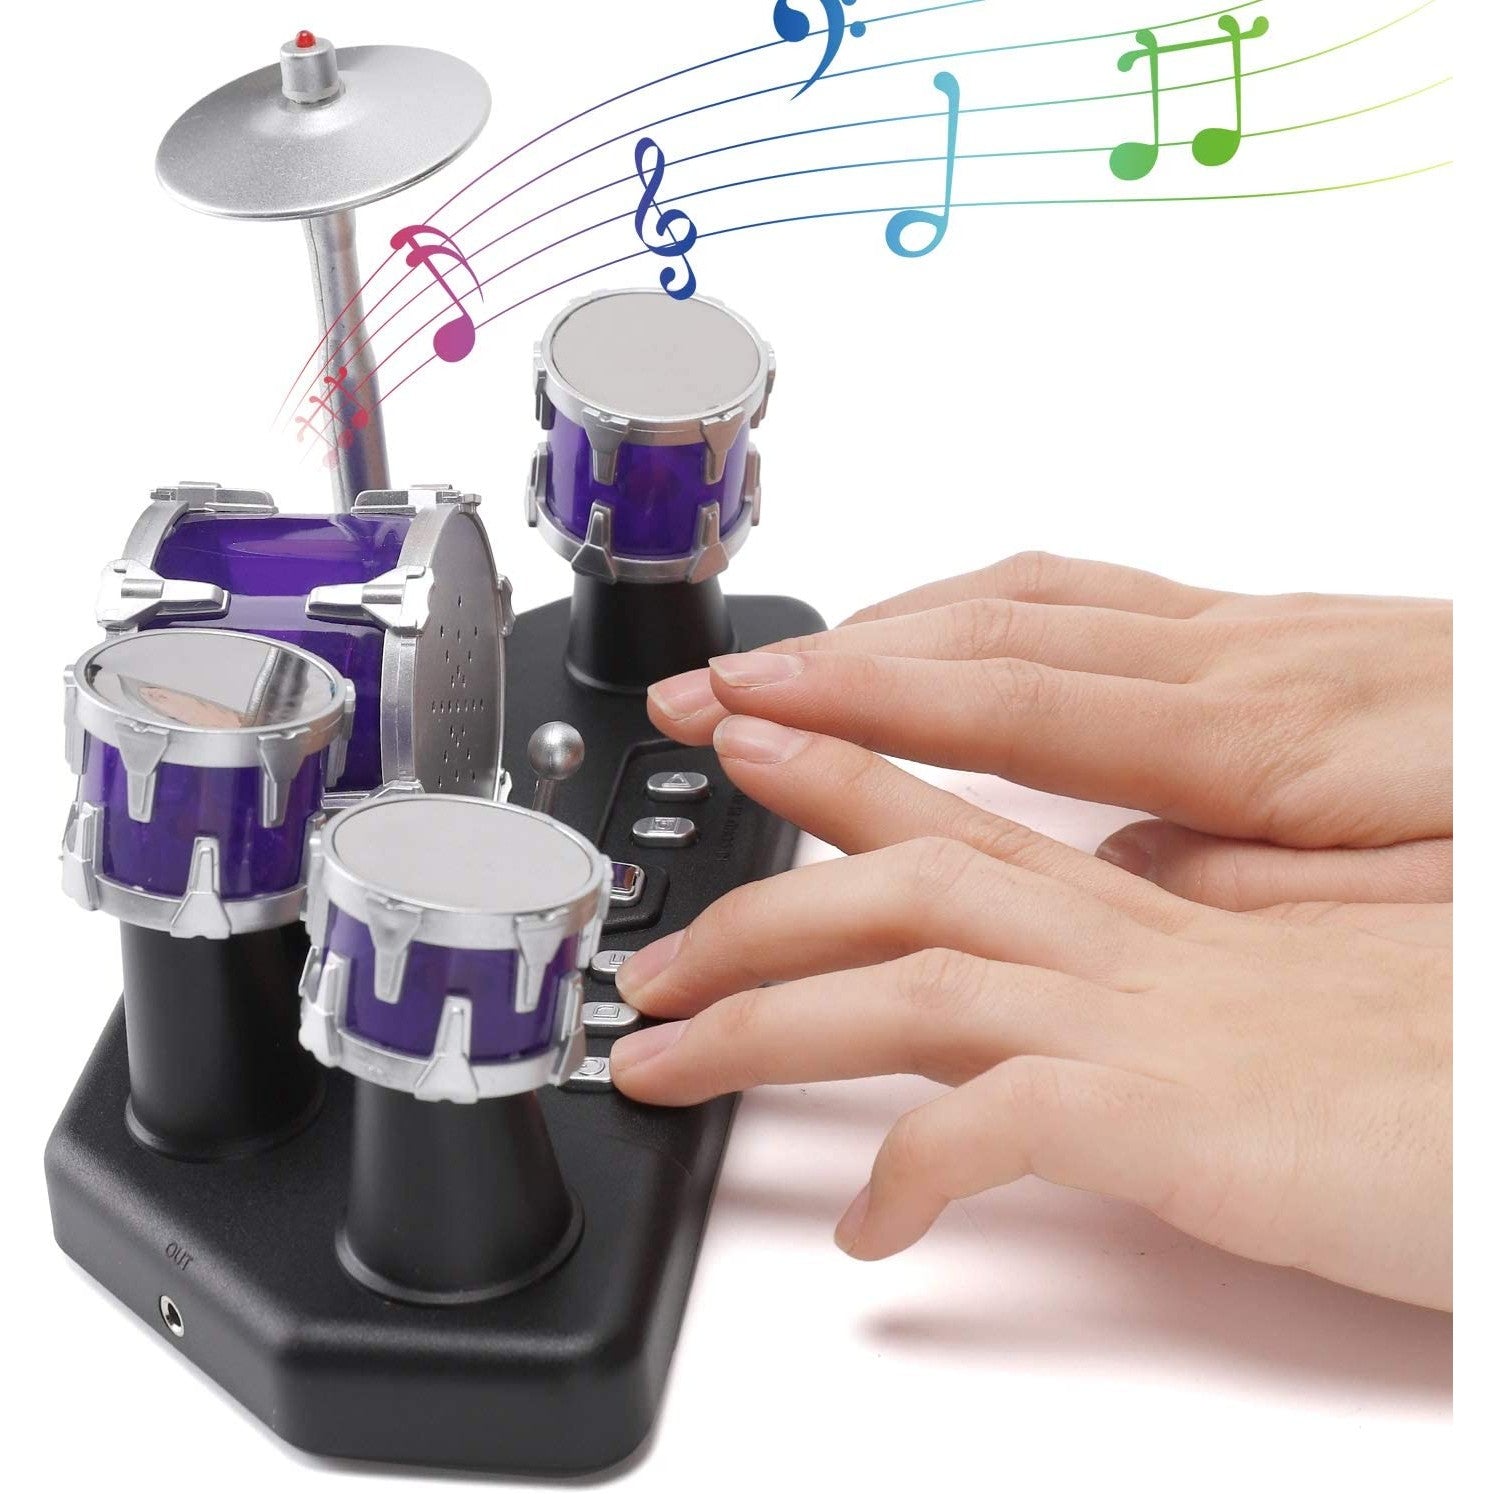 A purple and silver colored mini desktop finger drum set. A pair of hands are using the set and colorful musical notes are shown emanating from the drum set. 